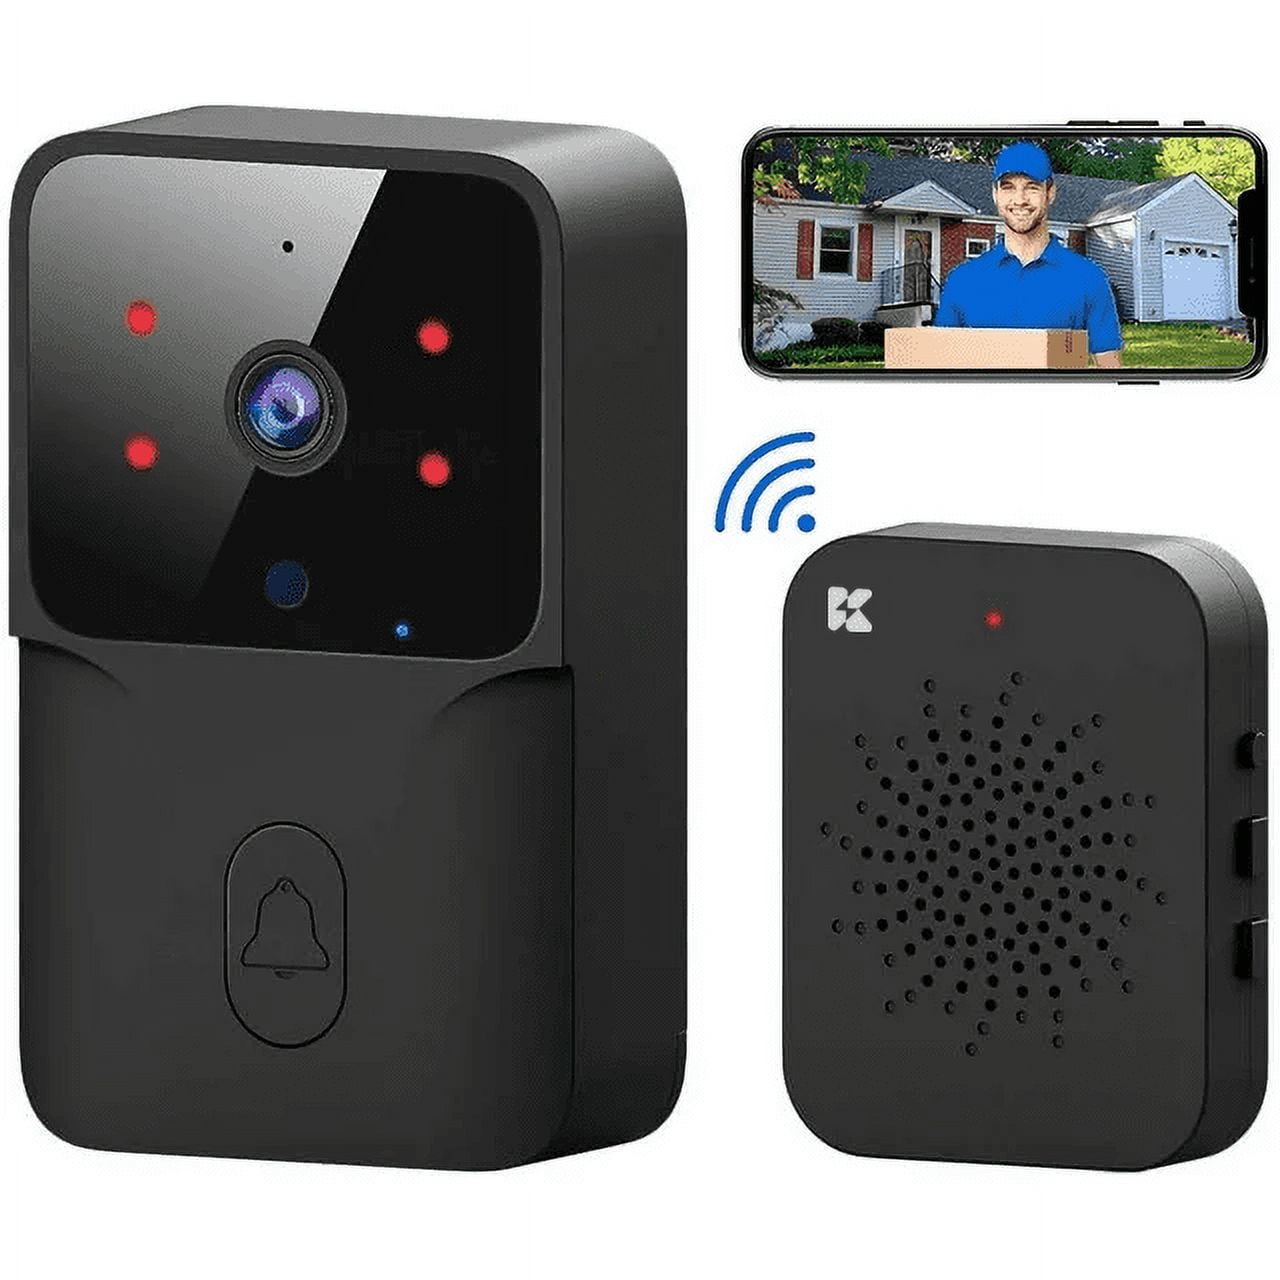 Eufy's wireless home security systems — including 'the doorbell to get!' —  are up to 60% off 'til midnight